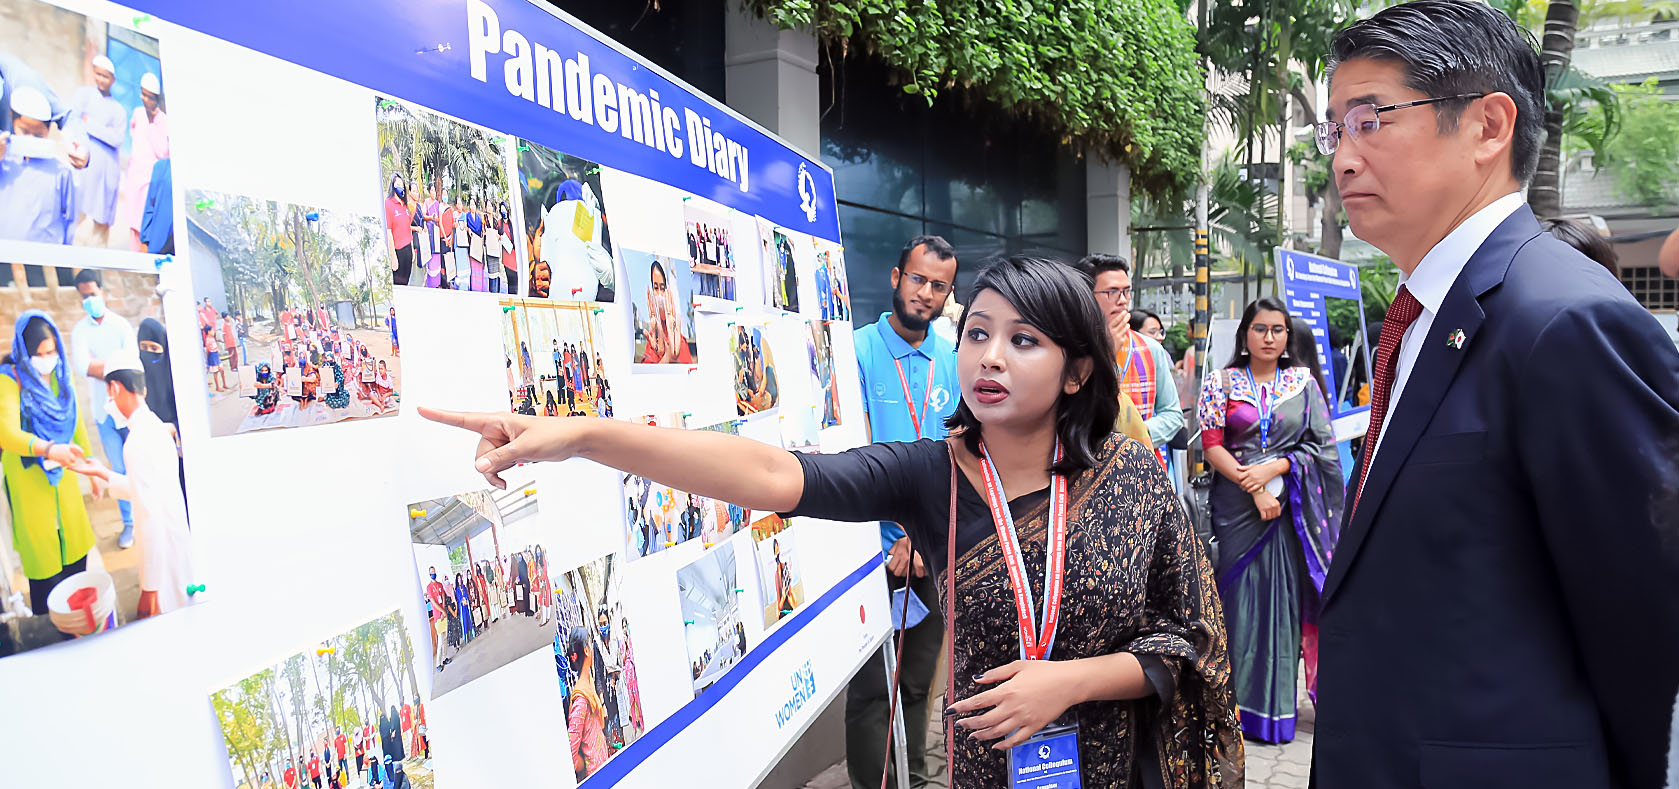 Young Bengali woman is presenting some information on the photo board to a Japanese male ambassador